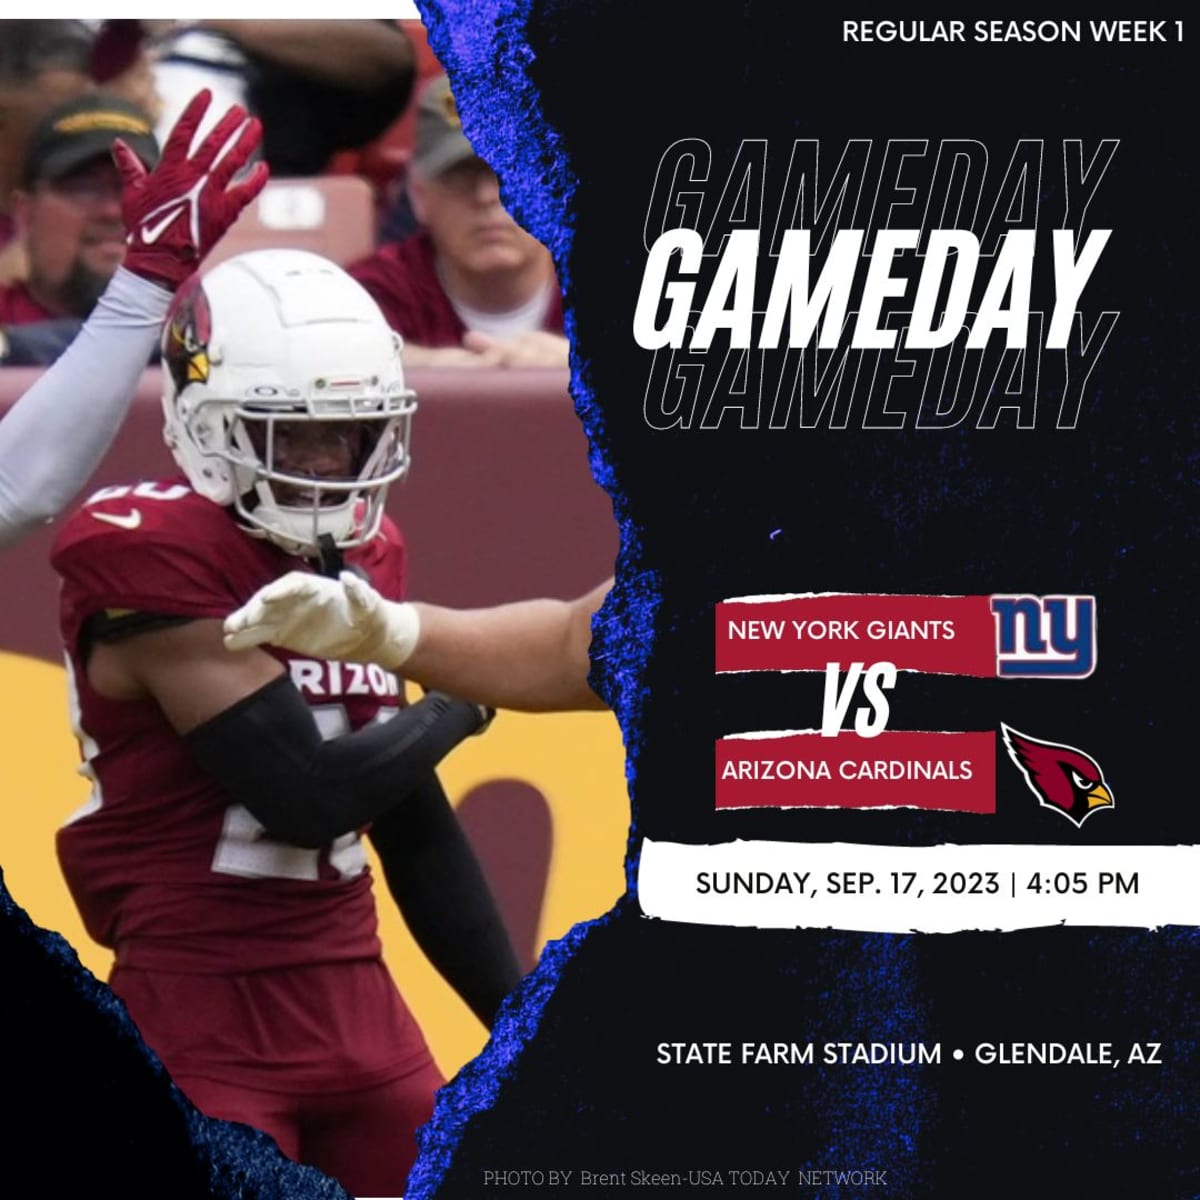 How To Watch: Giants at Cardinals, Week 2